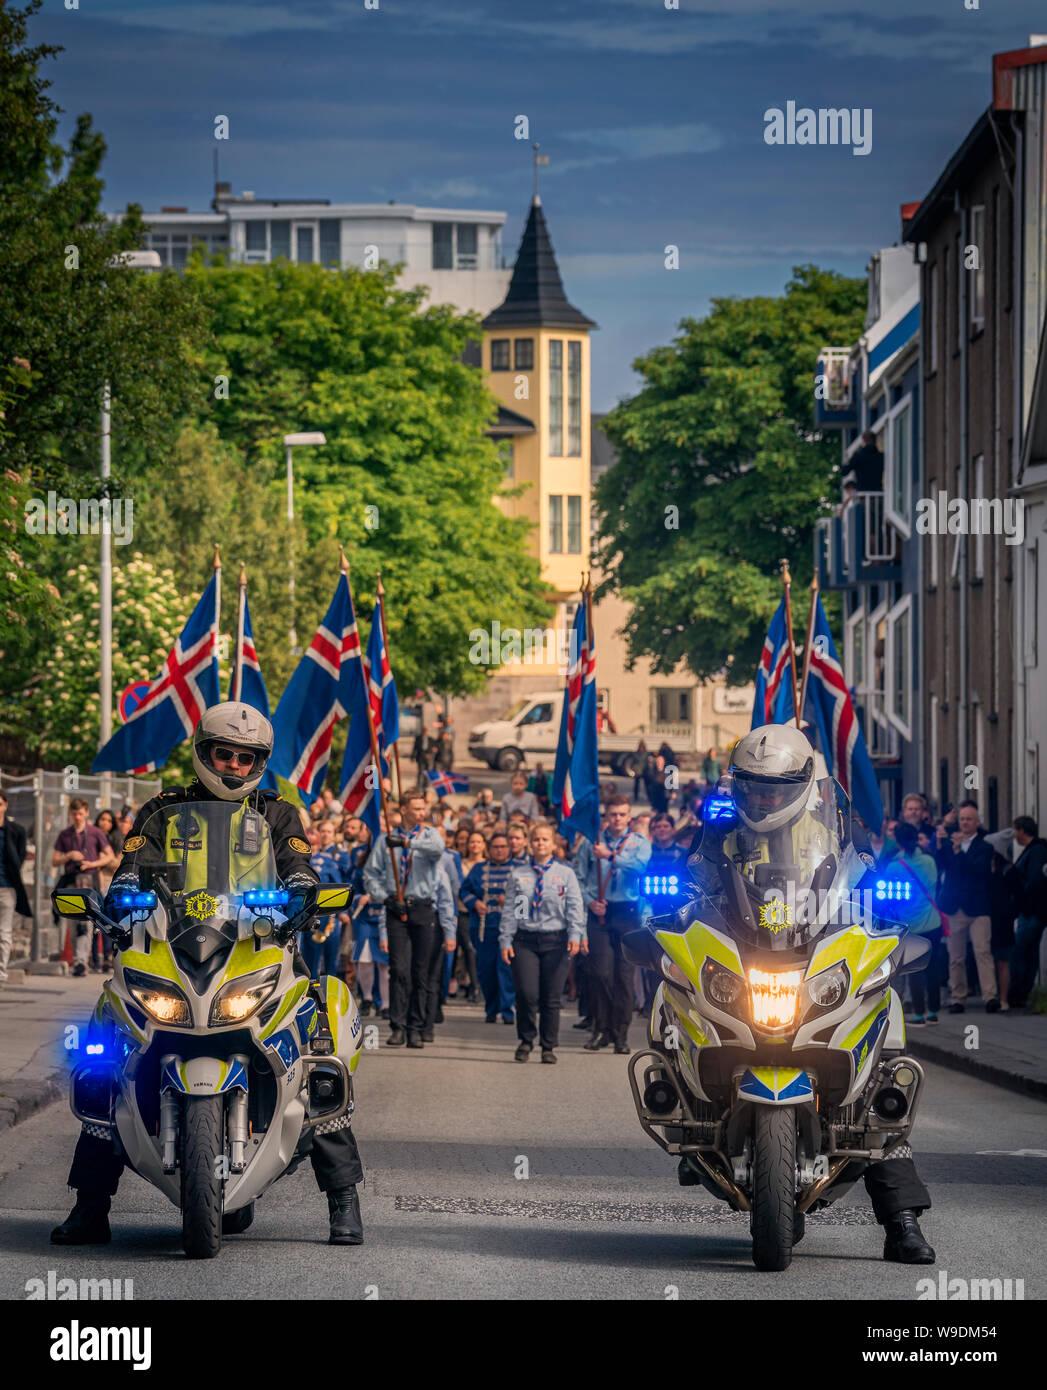 Scouts being escorted by Icelandic police during a parade, celebrating Independence day, Reykjavik, Iceland Stock Photo